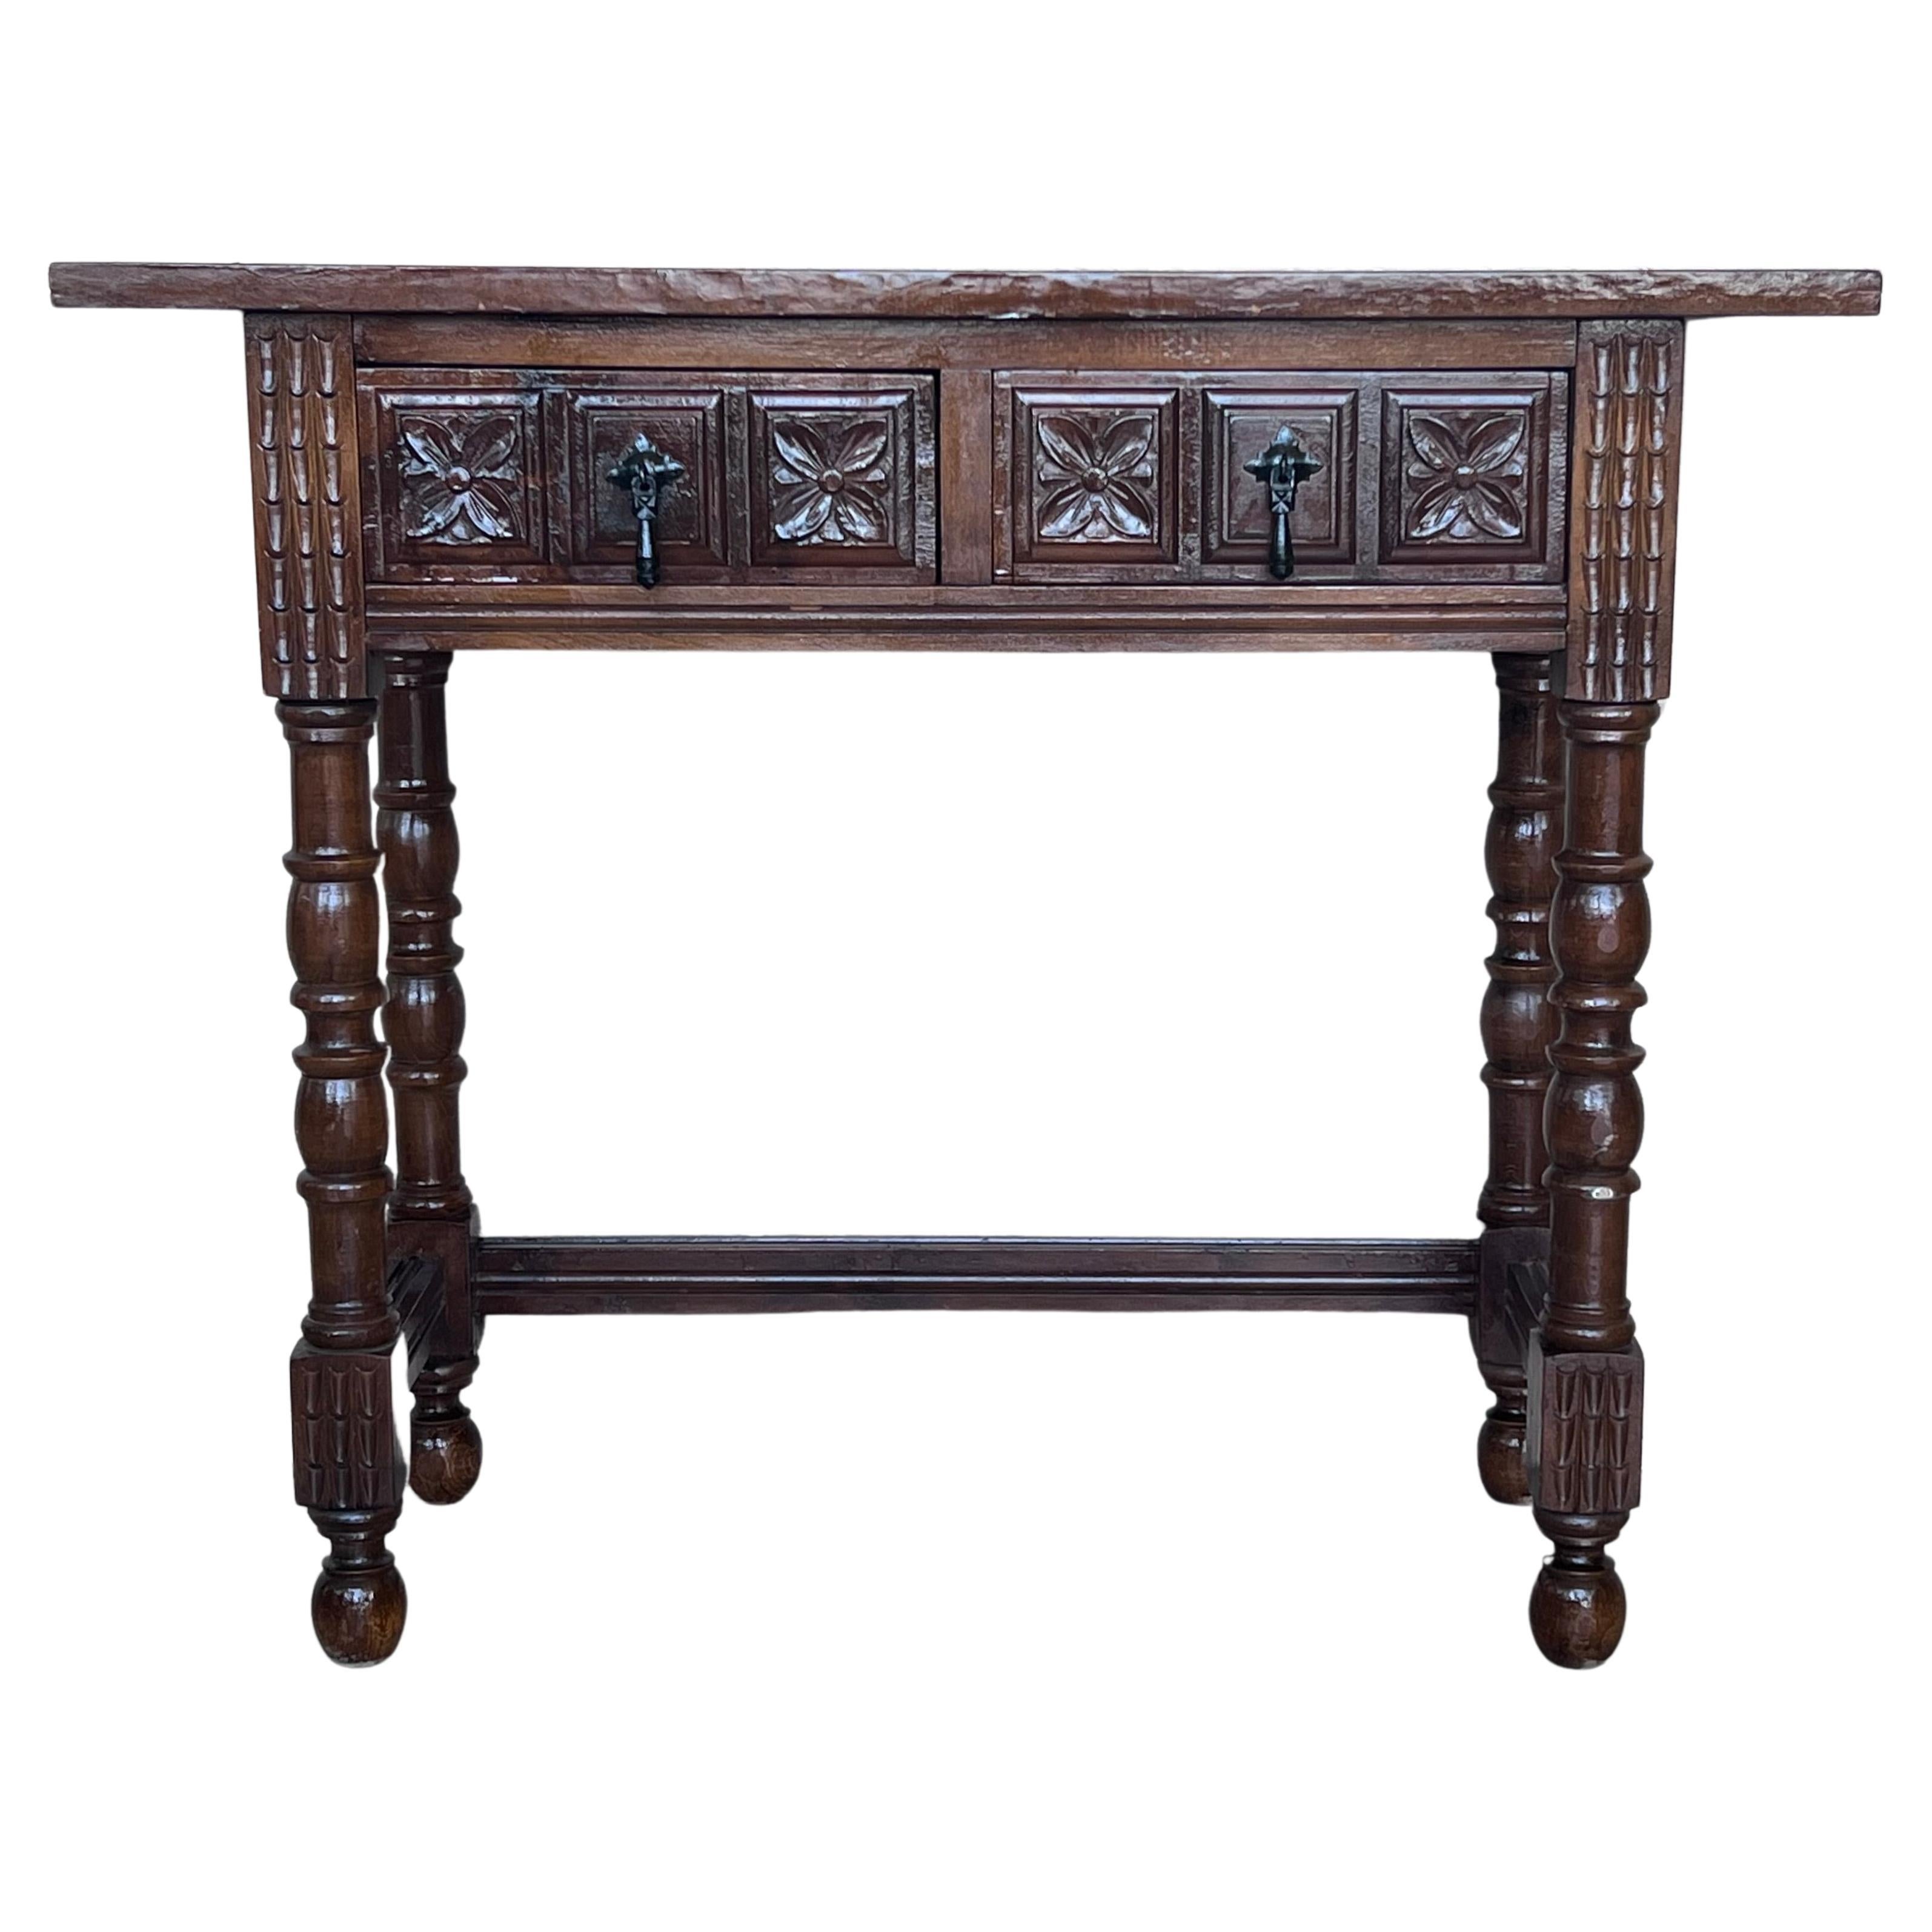 Early 20th Century Spanish Console Table with 2 Drawers and Turned Legs